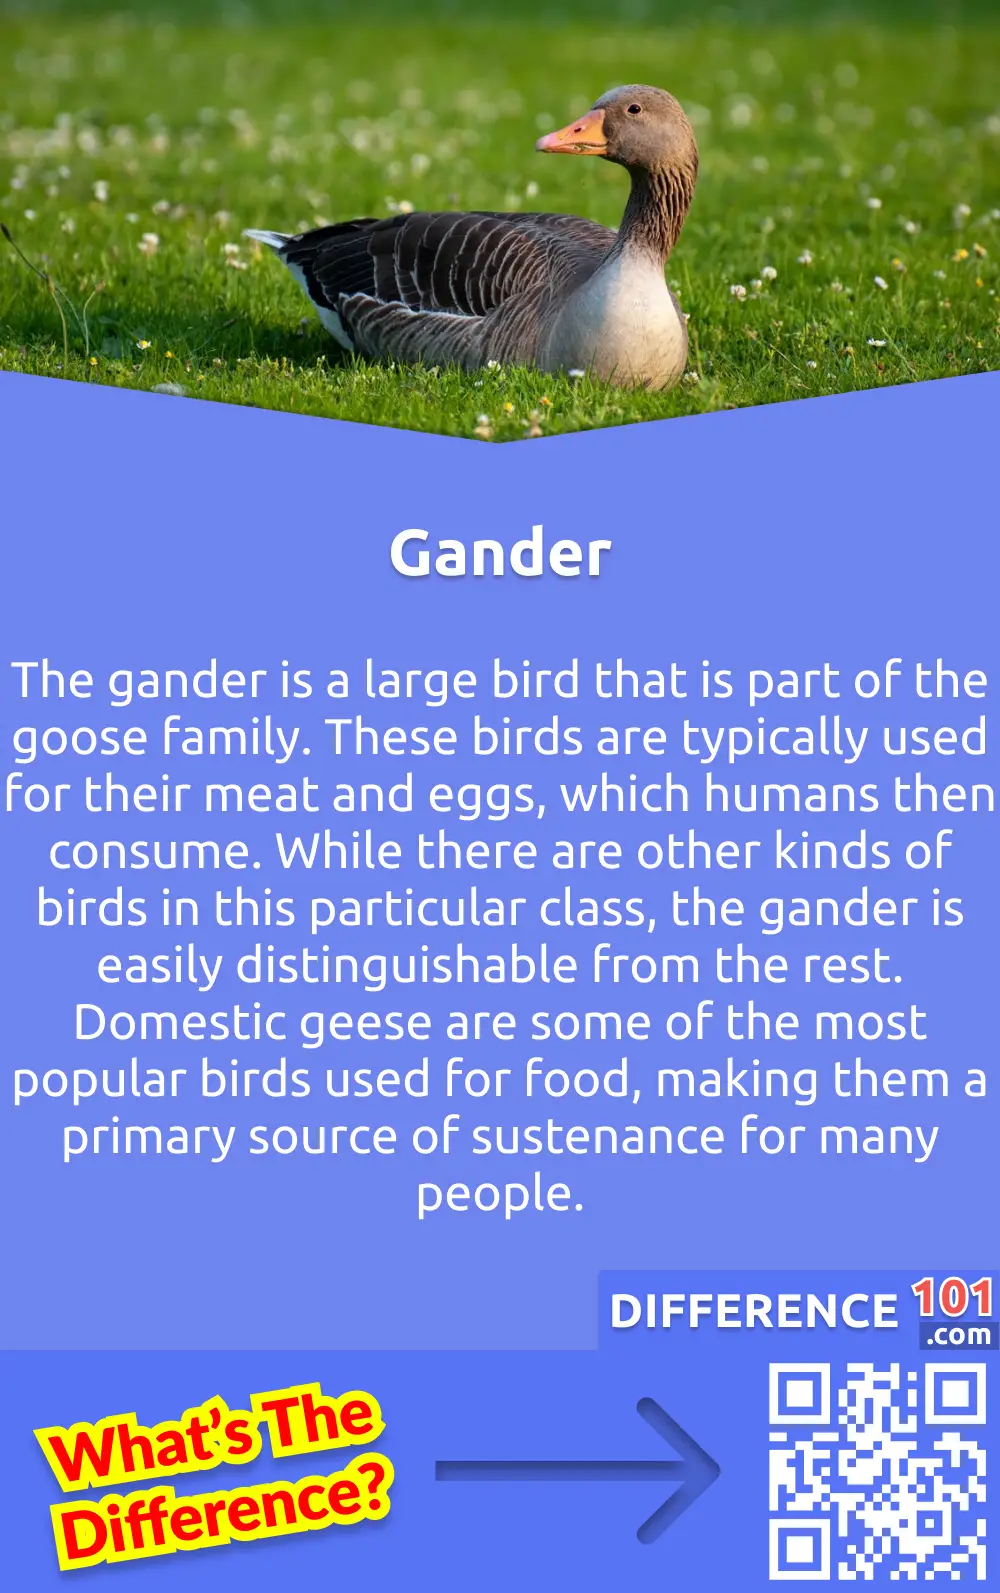 What Are Ganders? The gander is a large bird that is part of the goose family. These birds are typically used for their meat and eggs, which humans then consume. While there are other kinds of birds in this particular class, the gander is easily distinguishable from the rest. Domestic geese are some of the most popular birds used for food, making them a primary source of sustenance for many people.